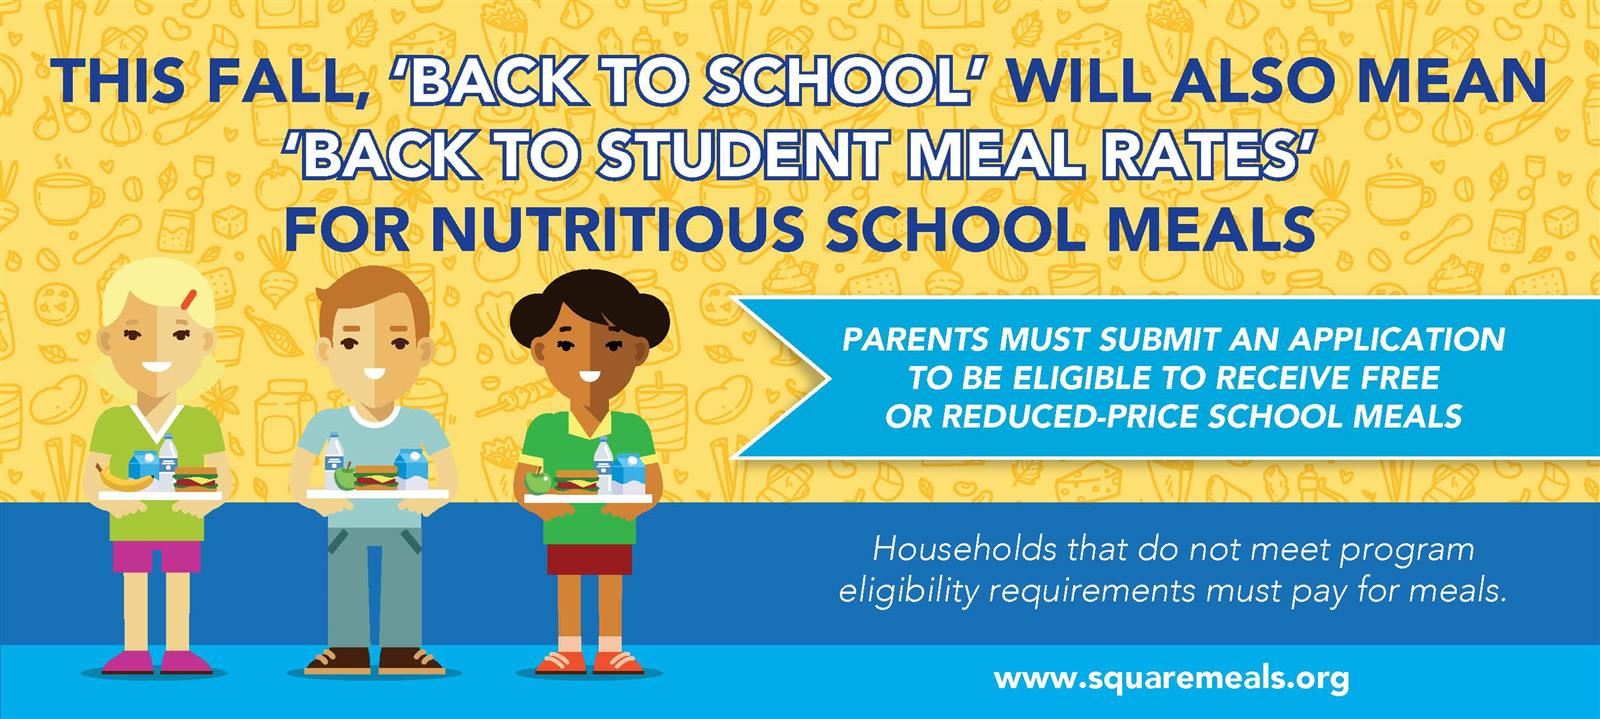  Back to School Meal Rates